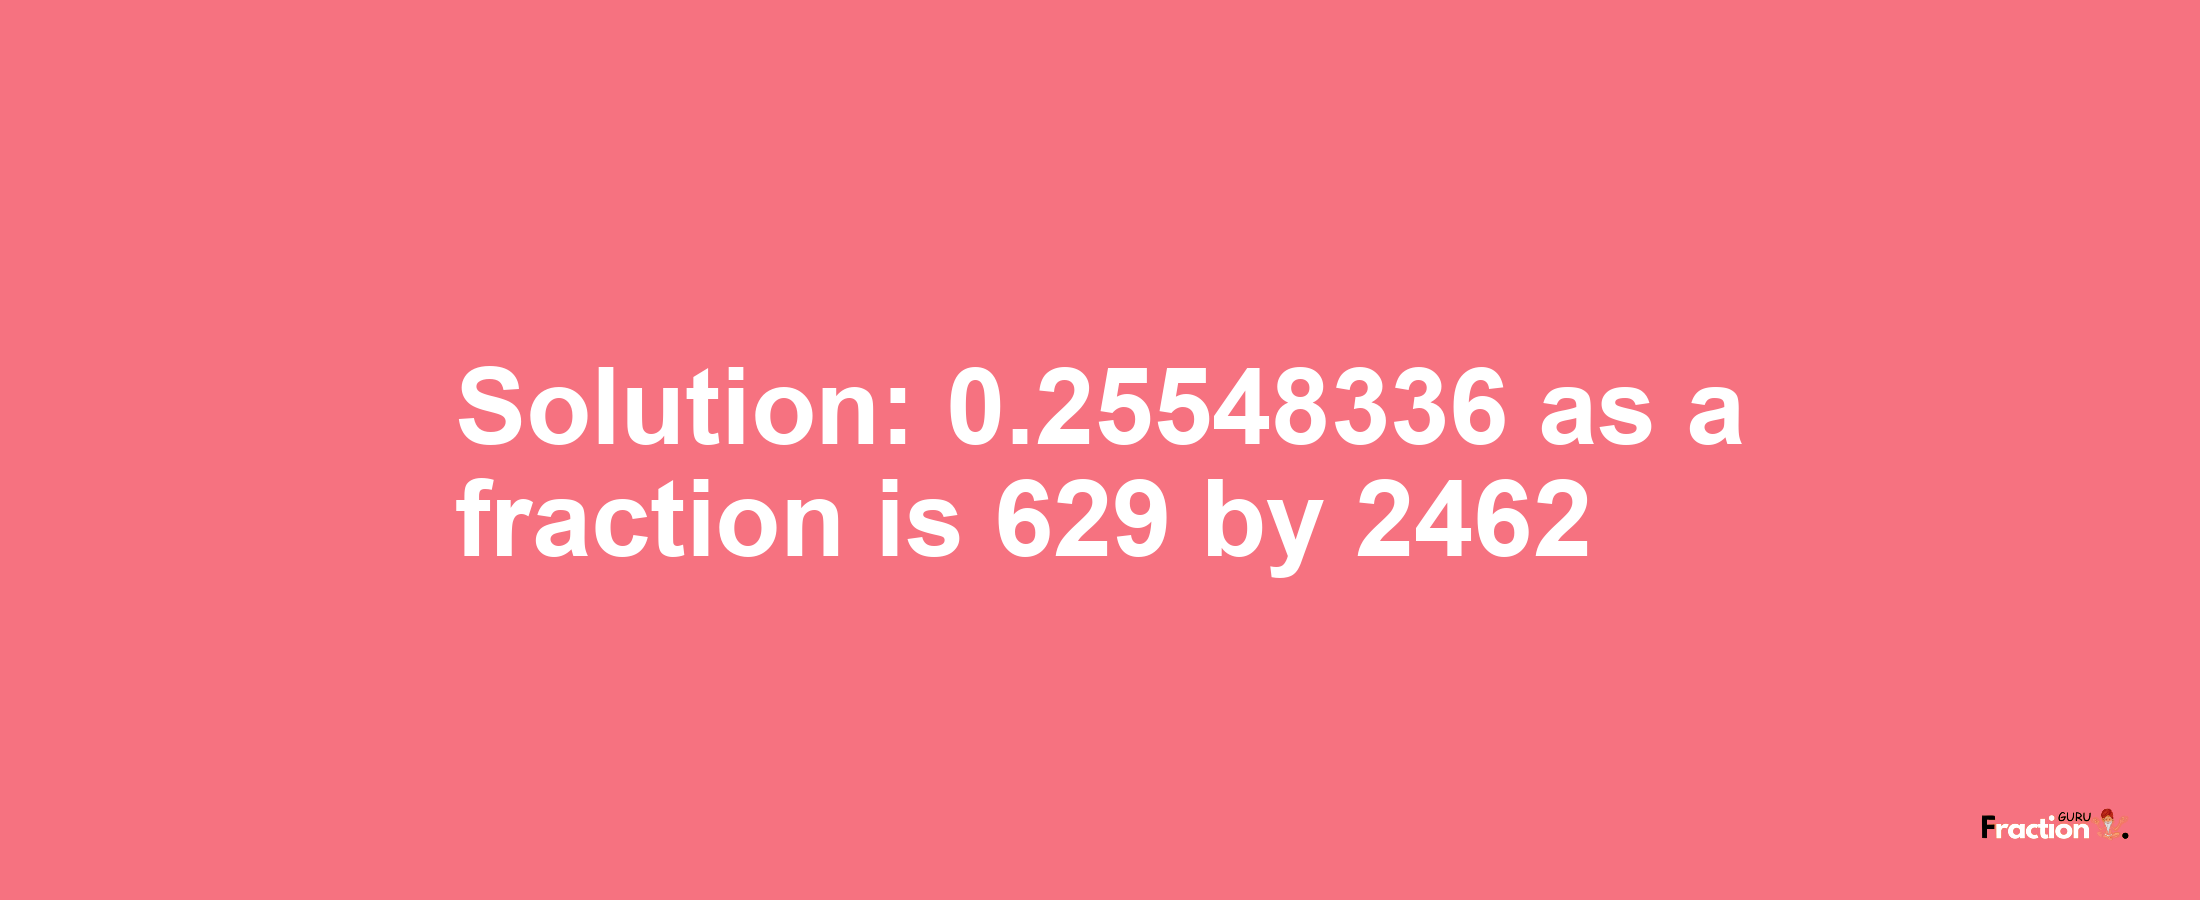 Solution:0.25548336 as a fraction is 629/2462